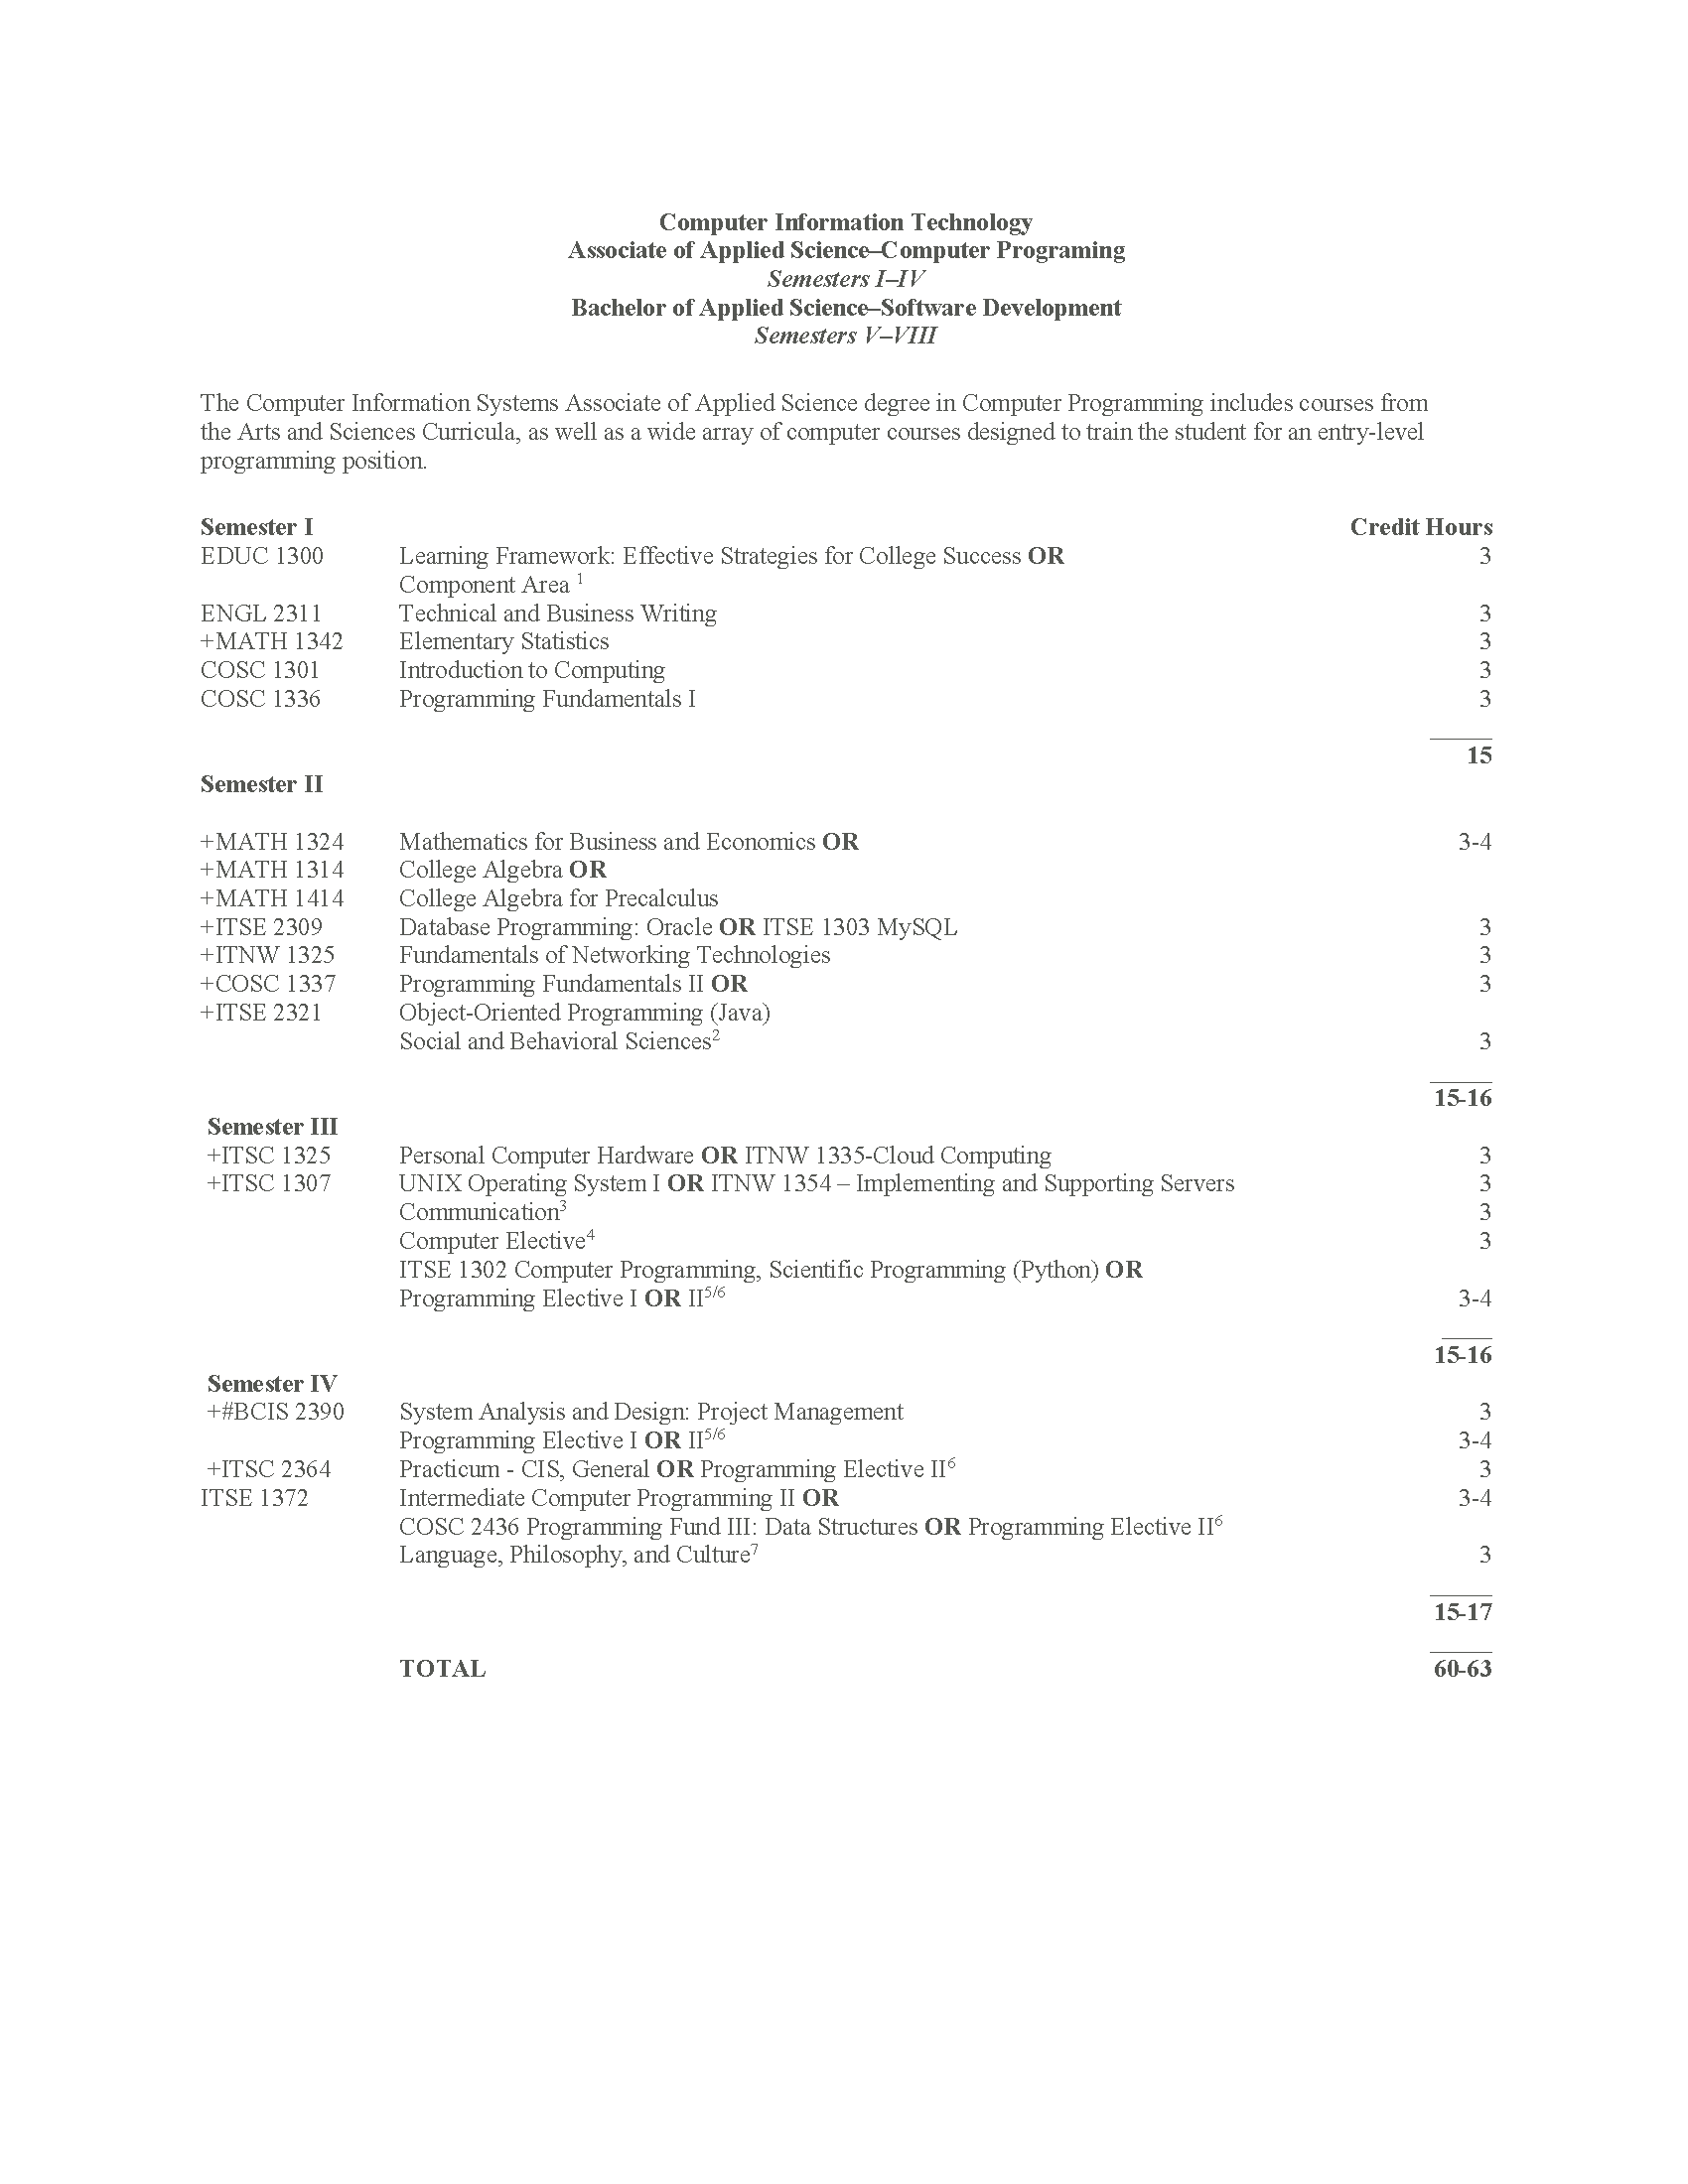 Screenshot of BAS degree page one